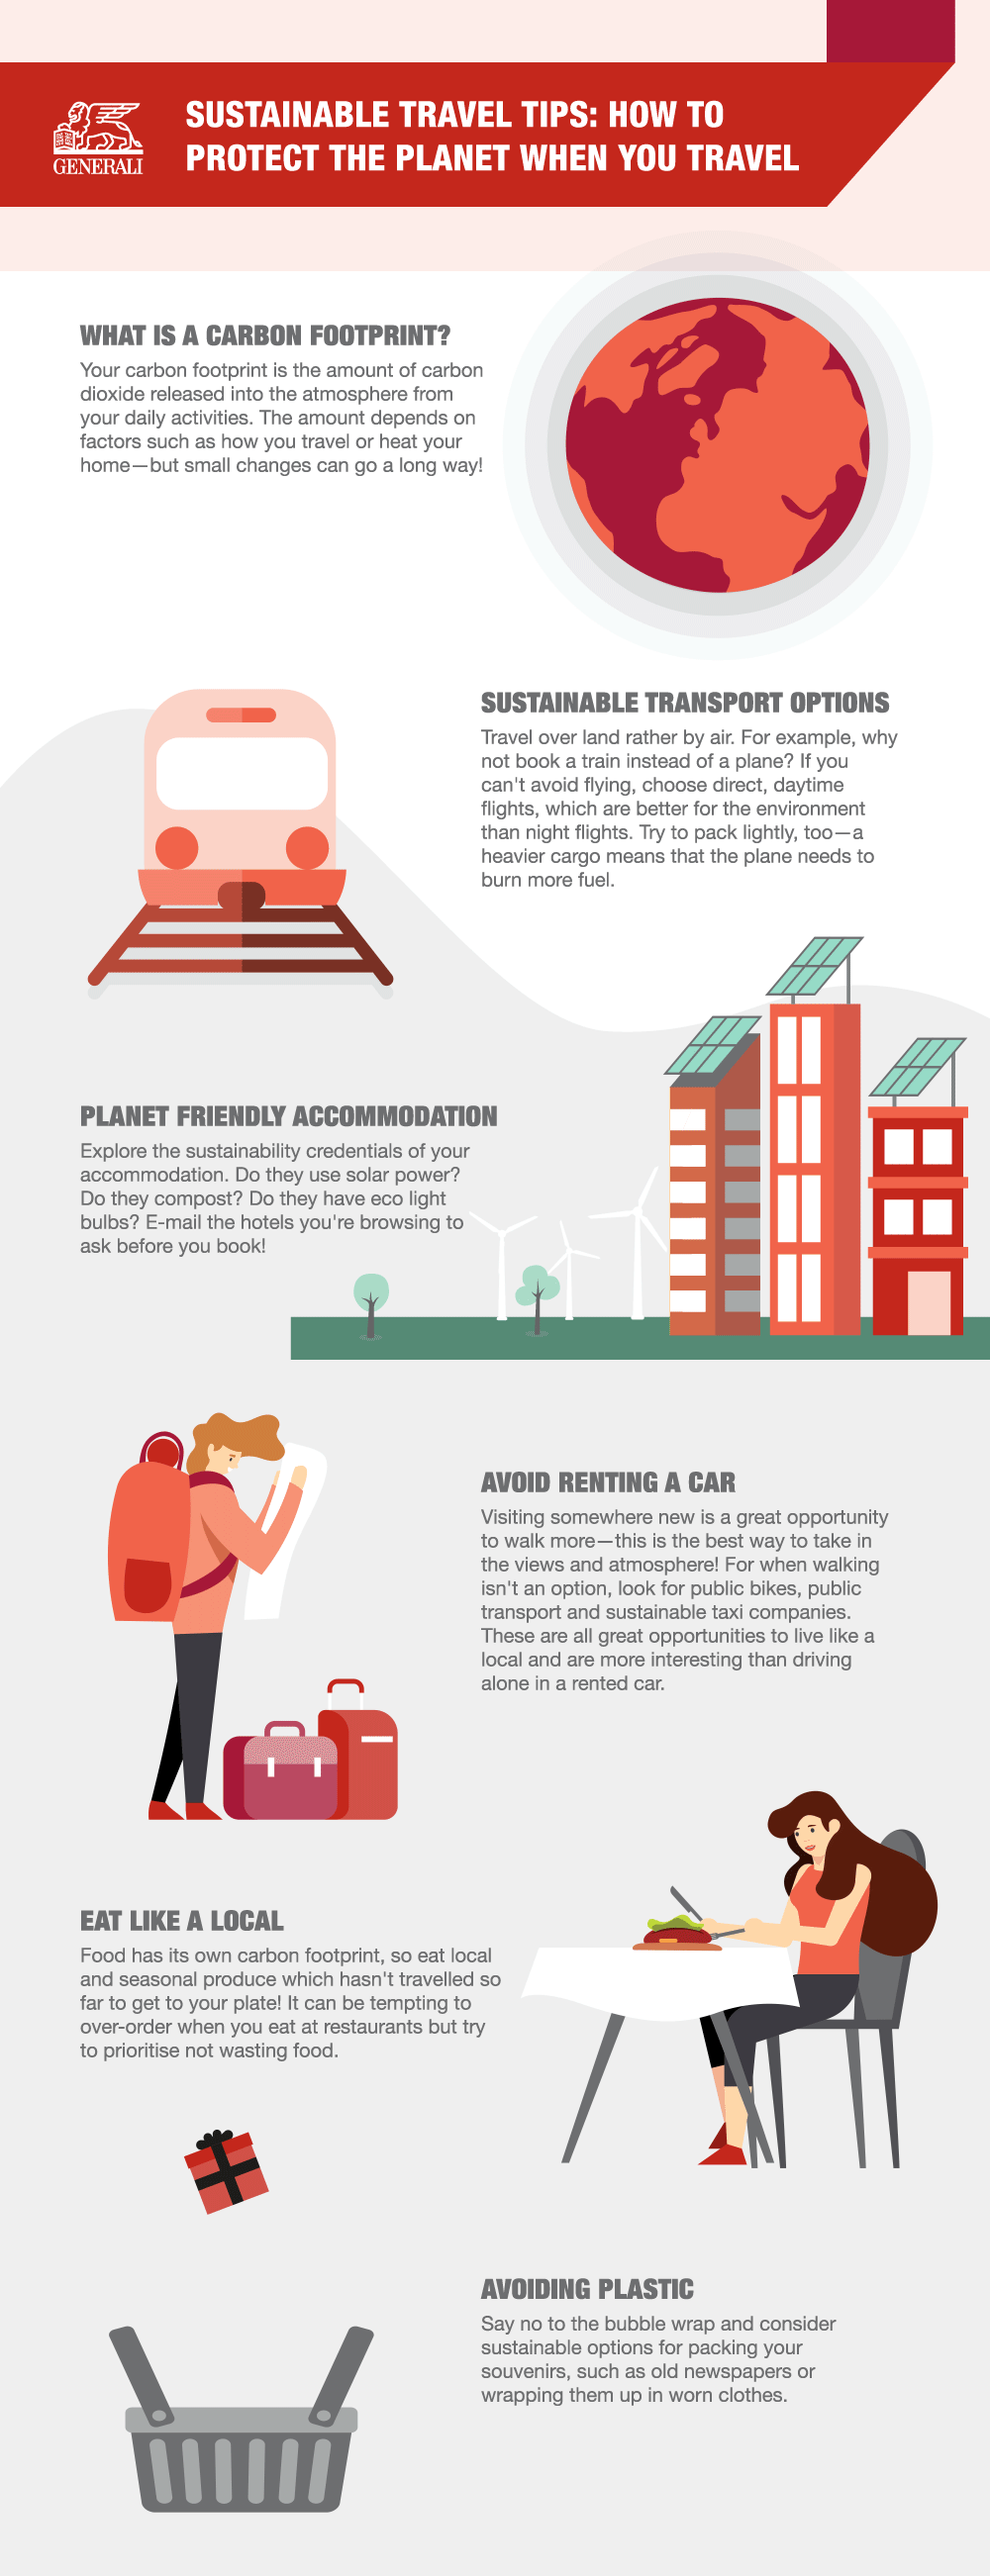 Sustainable travel tips infographic: How to Protect the Planet When you Travel